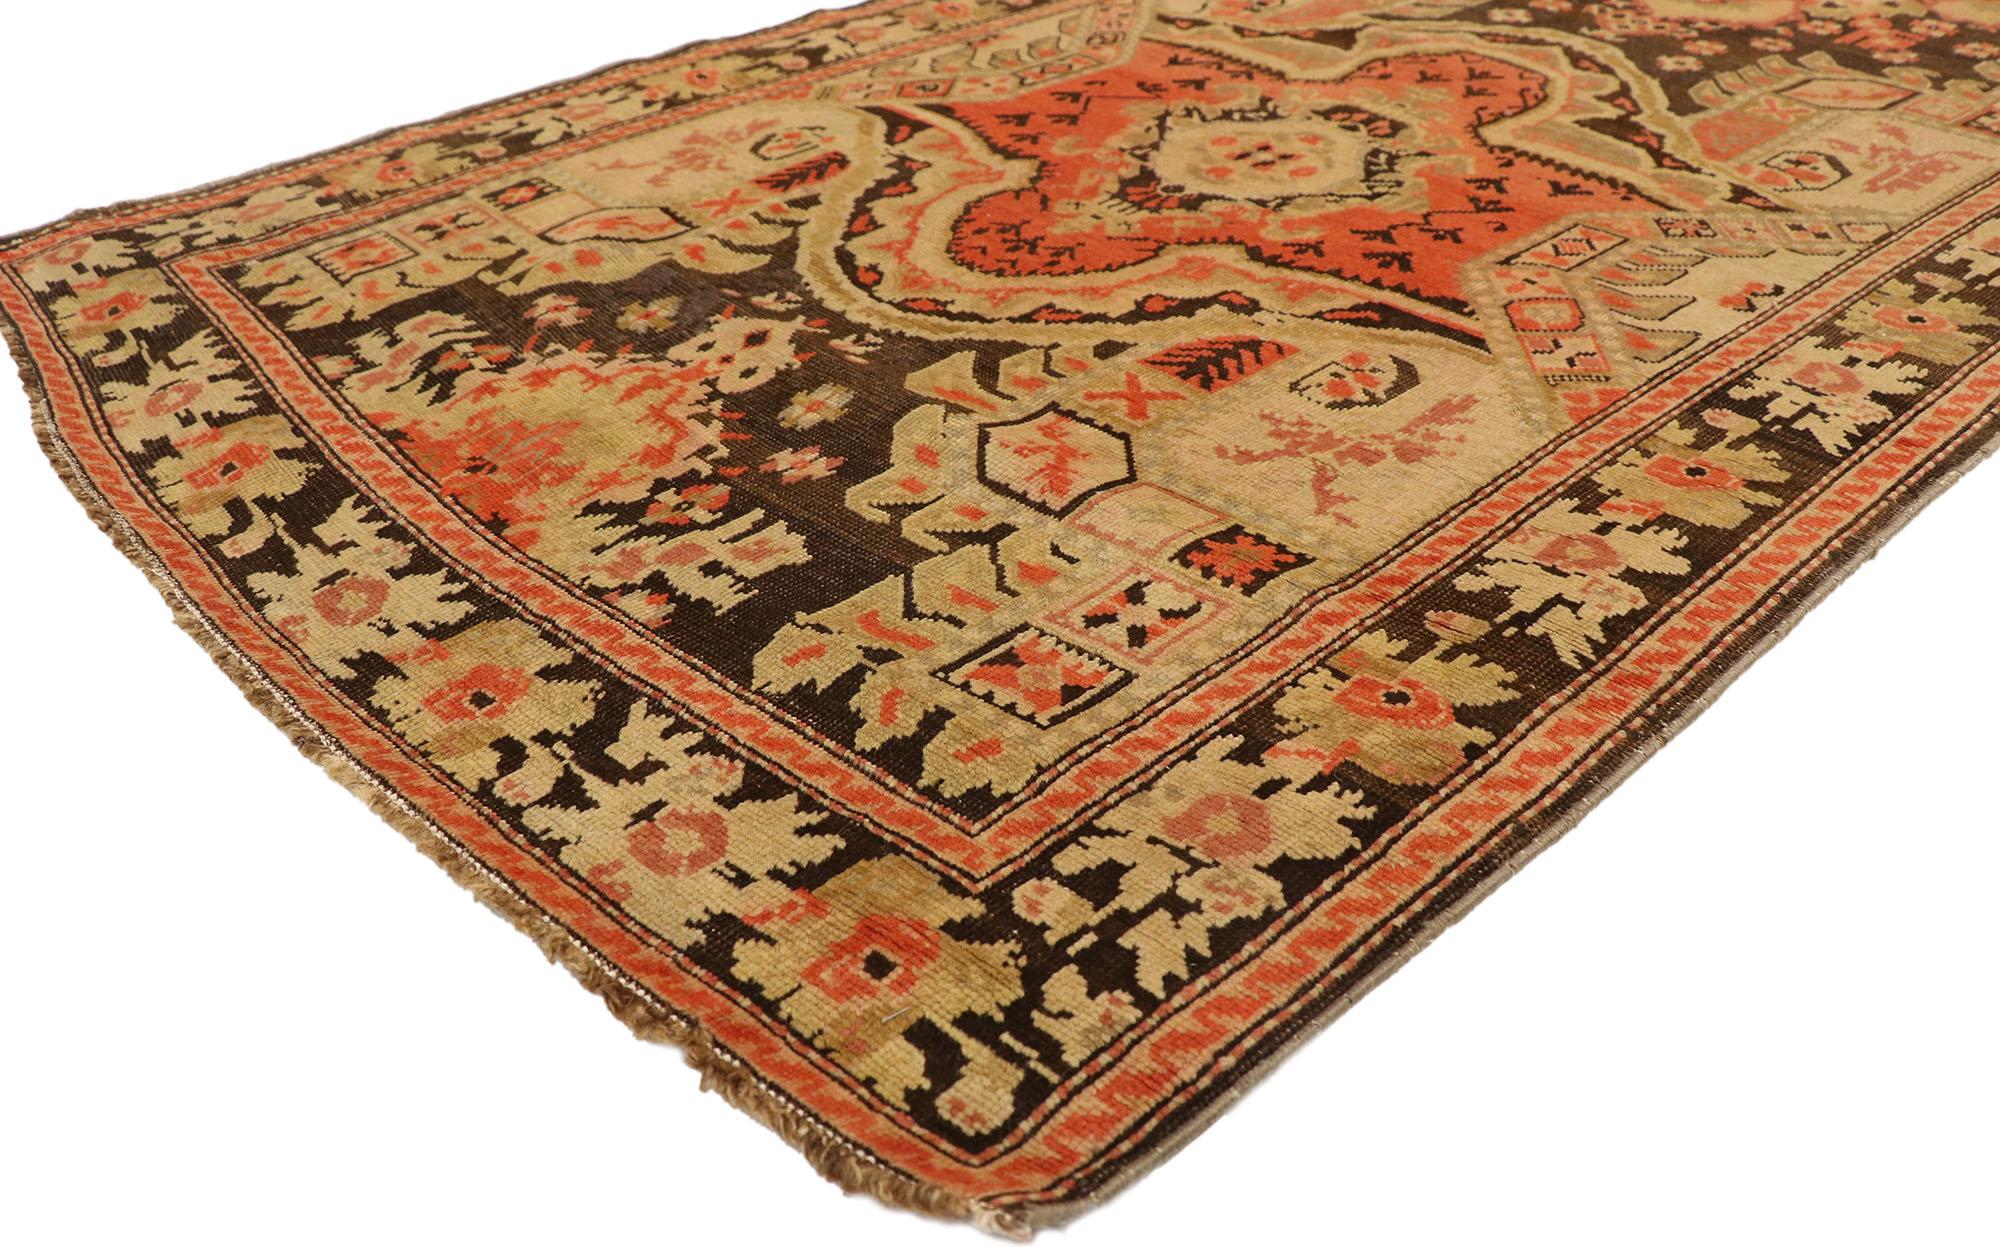 74034 Extra-Long Antique Caucasian Karabagh Runner, 03'07 X 20'00.
Emanating rugged sensibility with incredible detail and texture, this hand knotted wool antique Caucasian Karabagh rug runner is a captivating vision of woven beauty. The visual